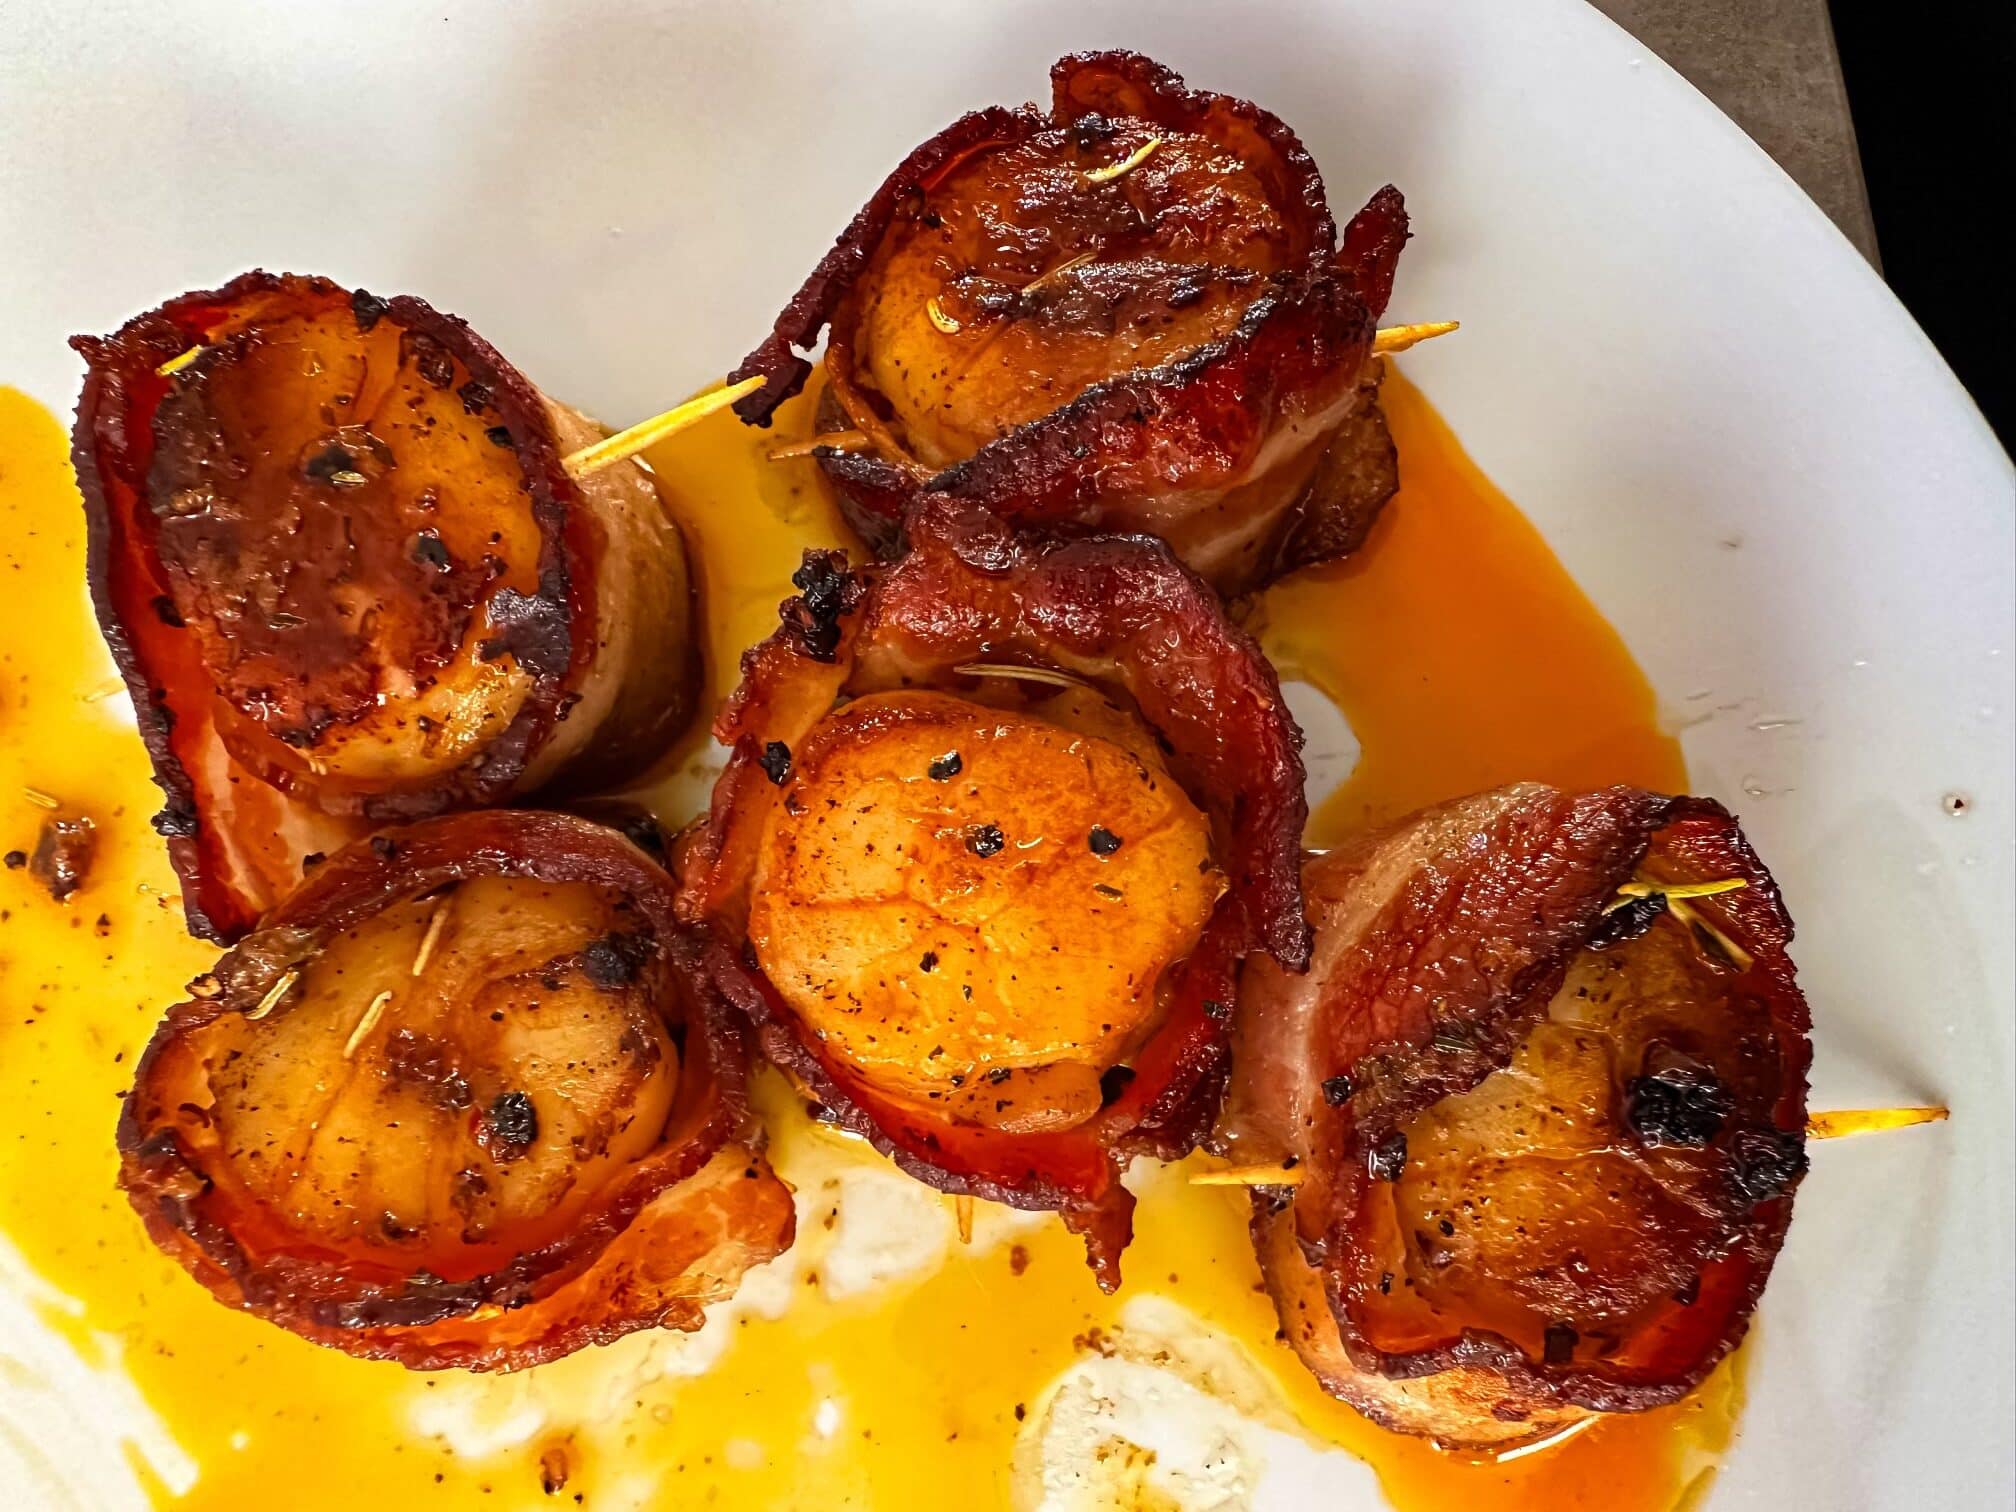 Bacon wrapped scallops with cowboy butter